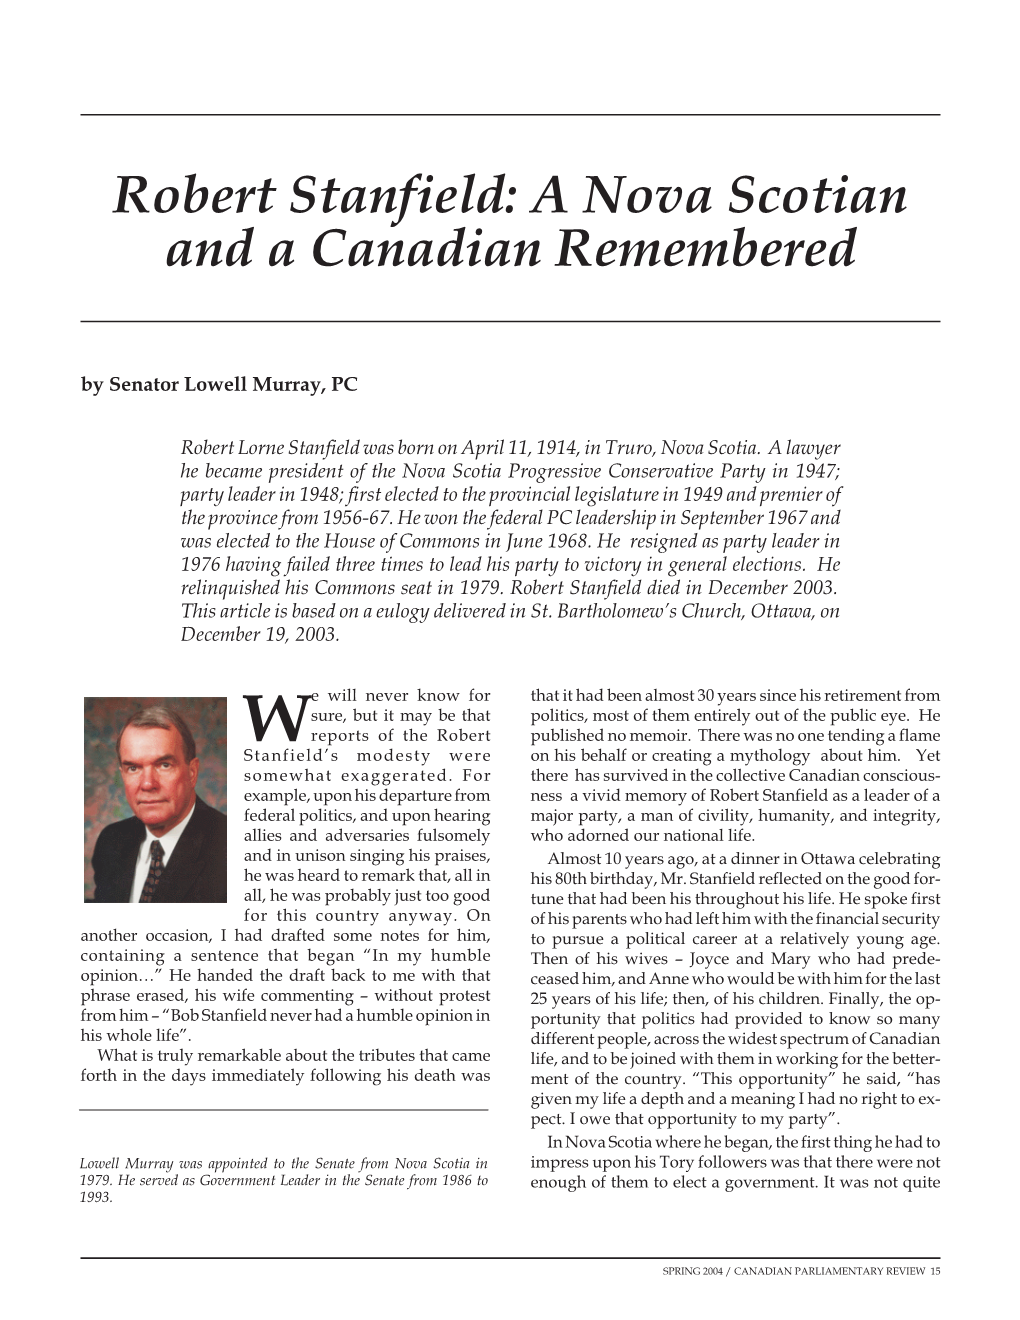 Robert Stanfield: a Nova Scotian and a Canadian Remembered